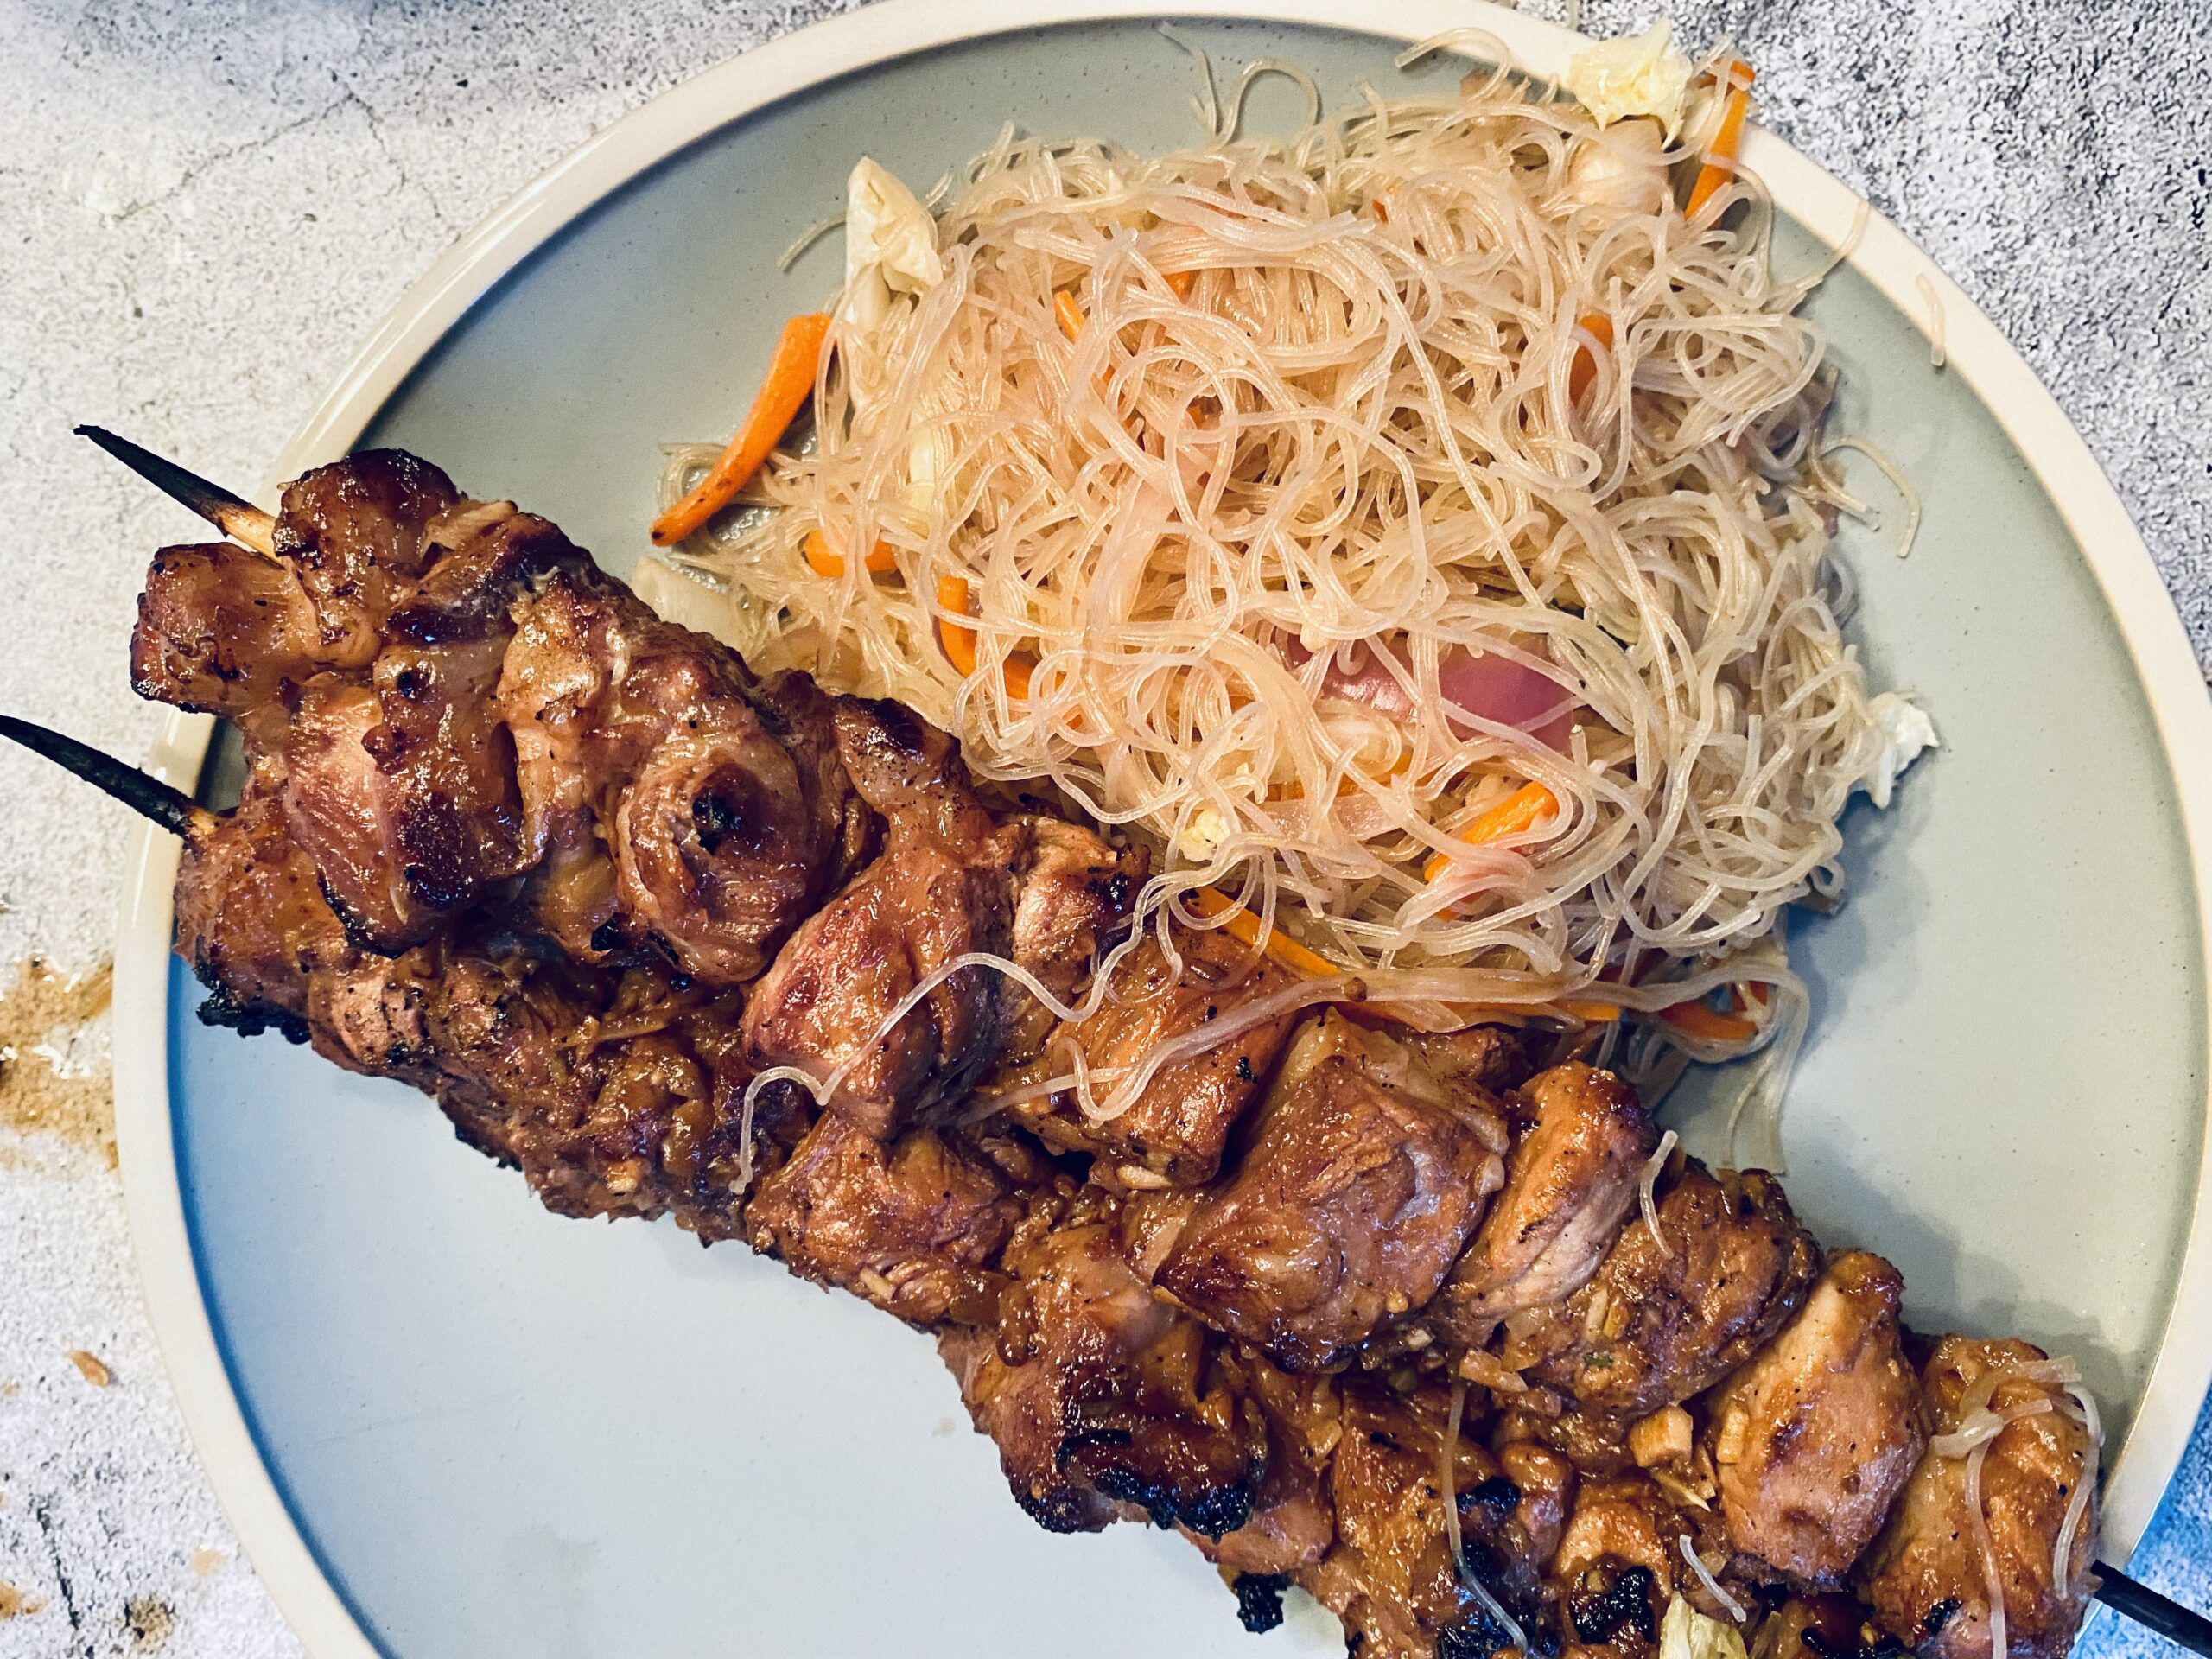 7D963B15 790E 4AF9 8325 D3745E98FCE9 scaled - The Best Filipino Pork Barbeque with Pancit